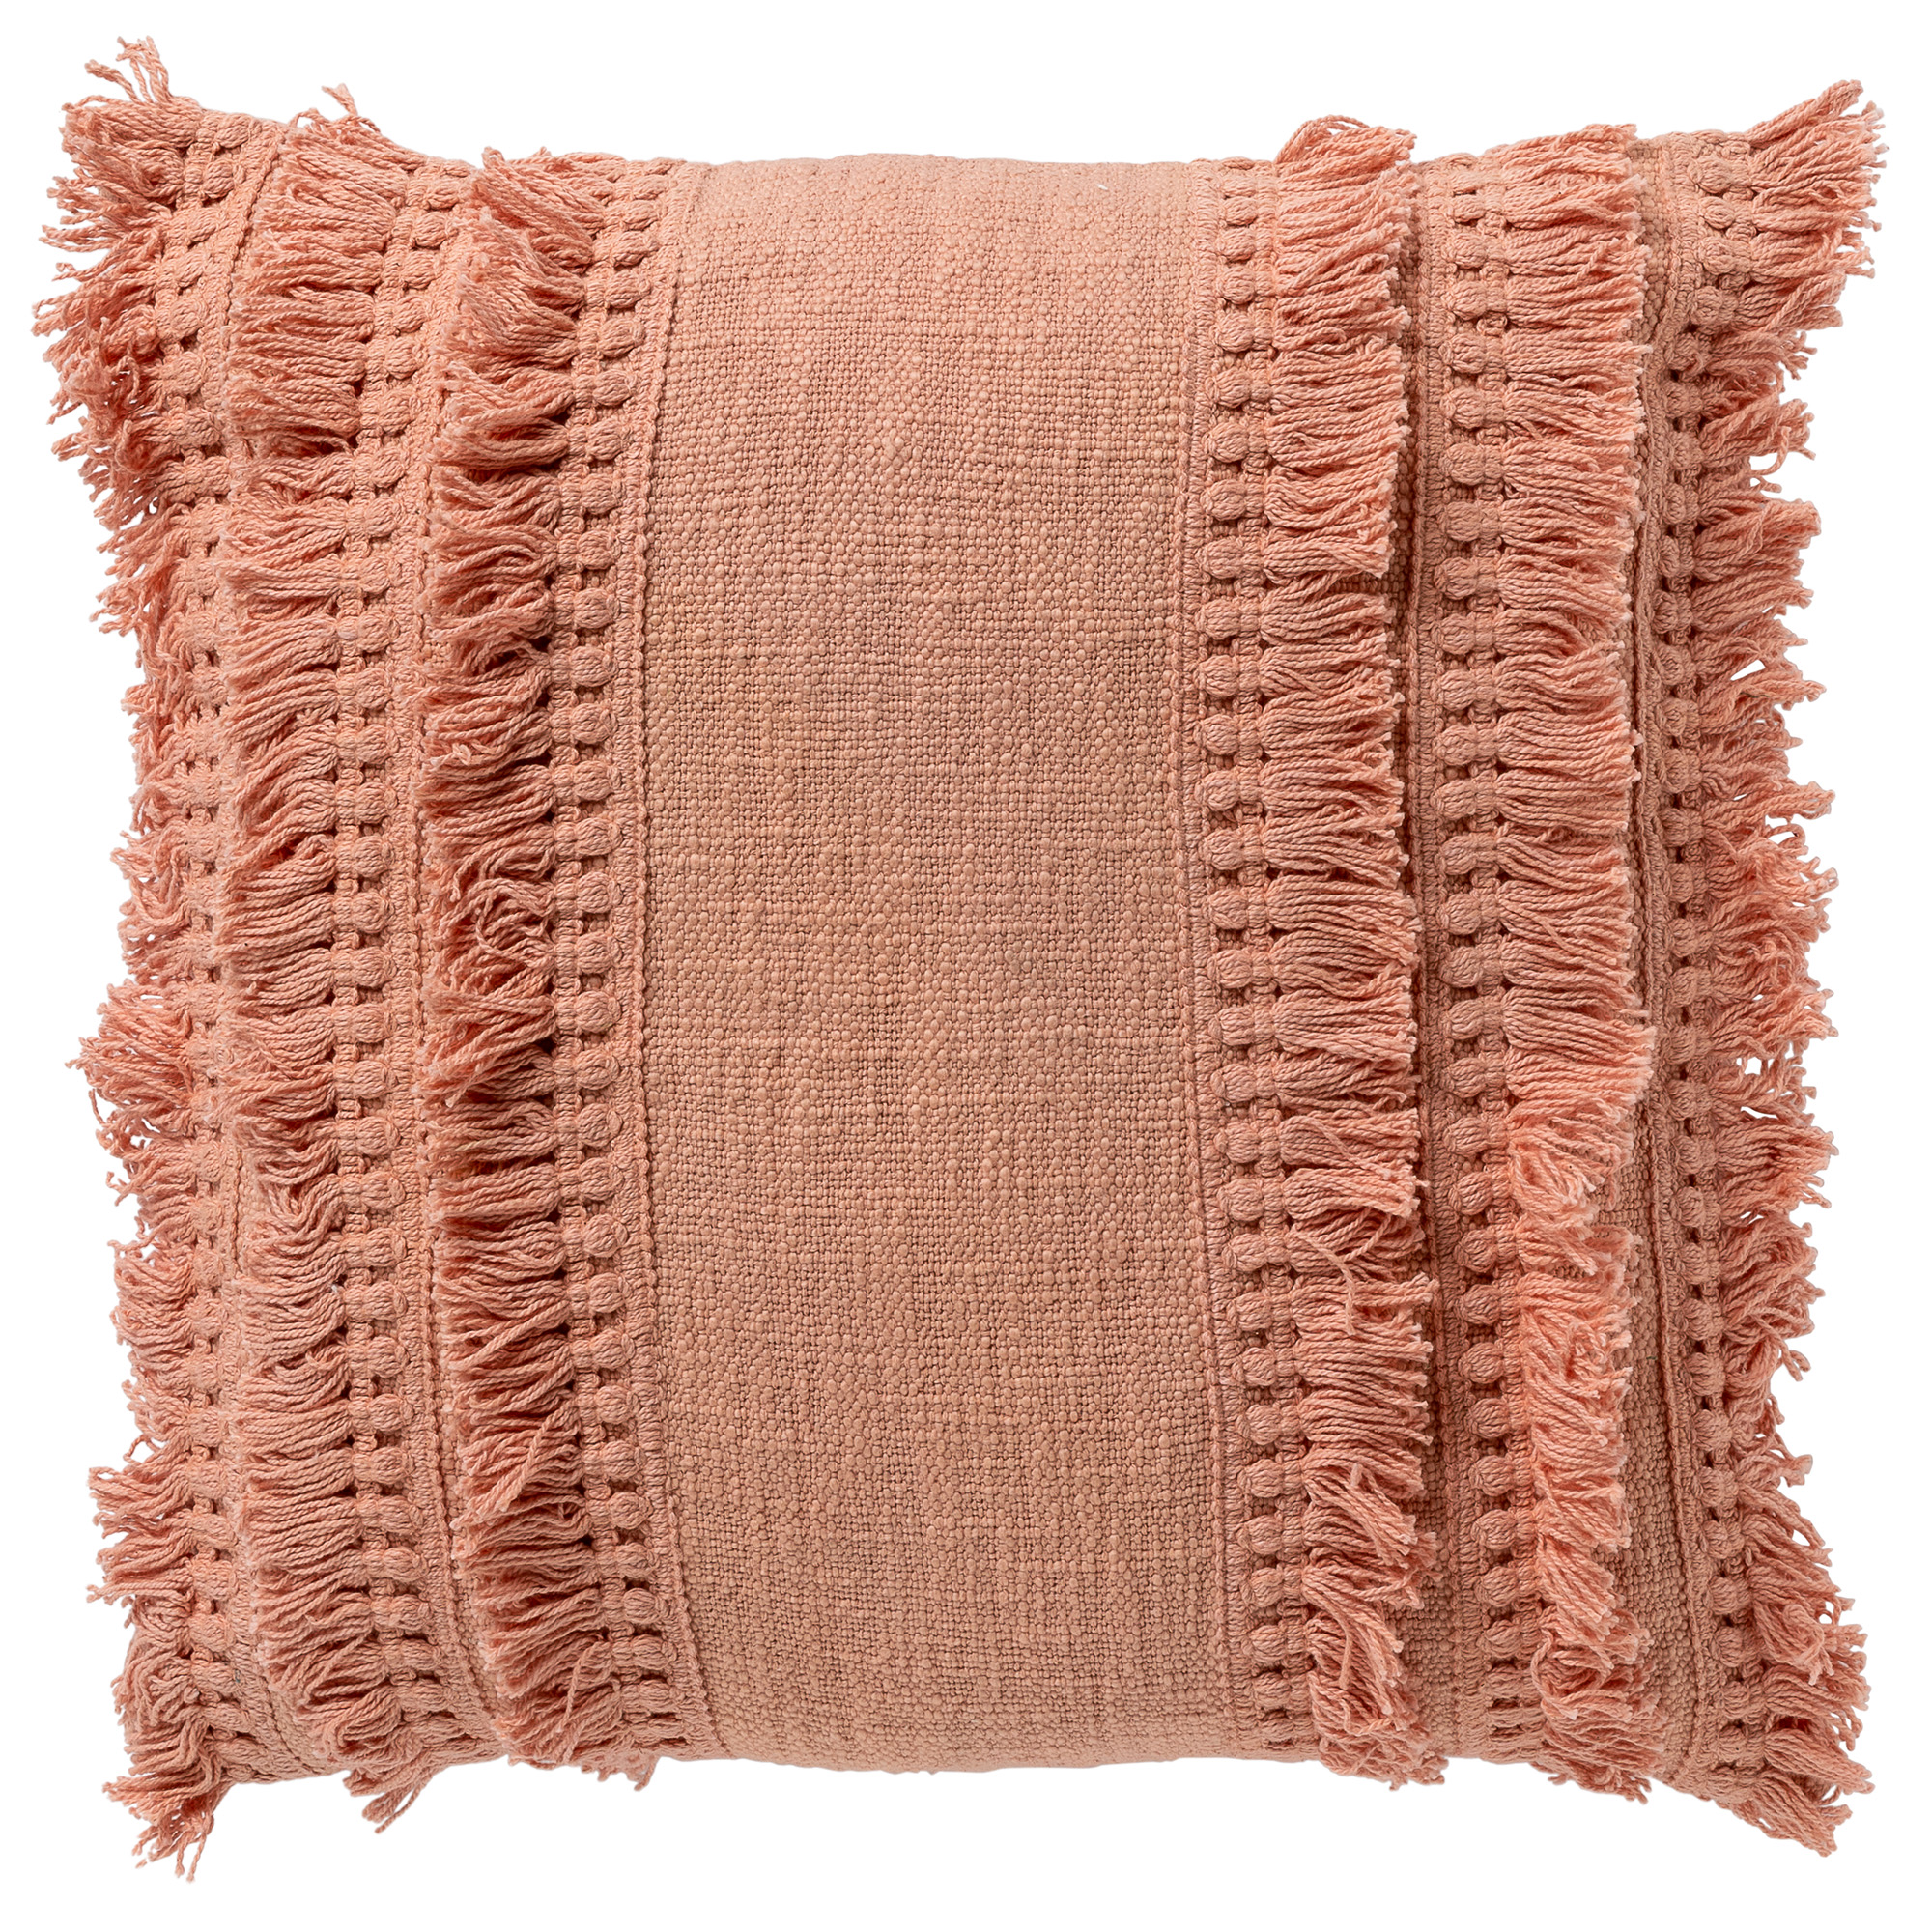 FARA - Kussenhoes 45x45 cm Muted Clay - roze